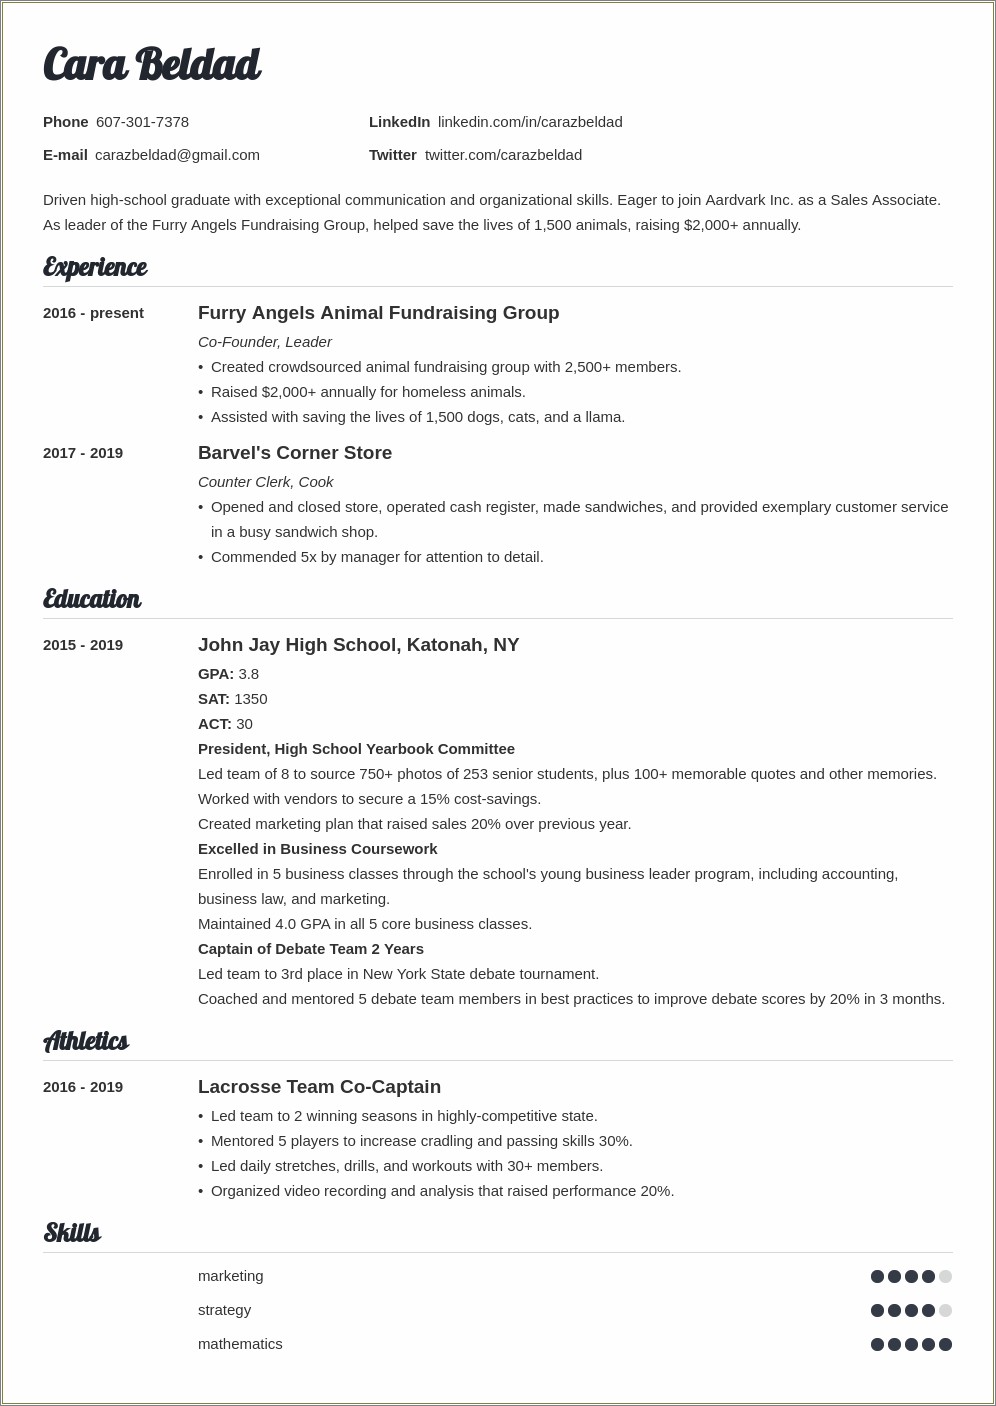 Resume That Sells Your Skills Format